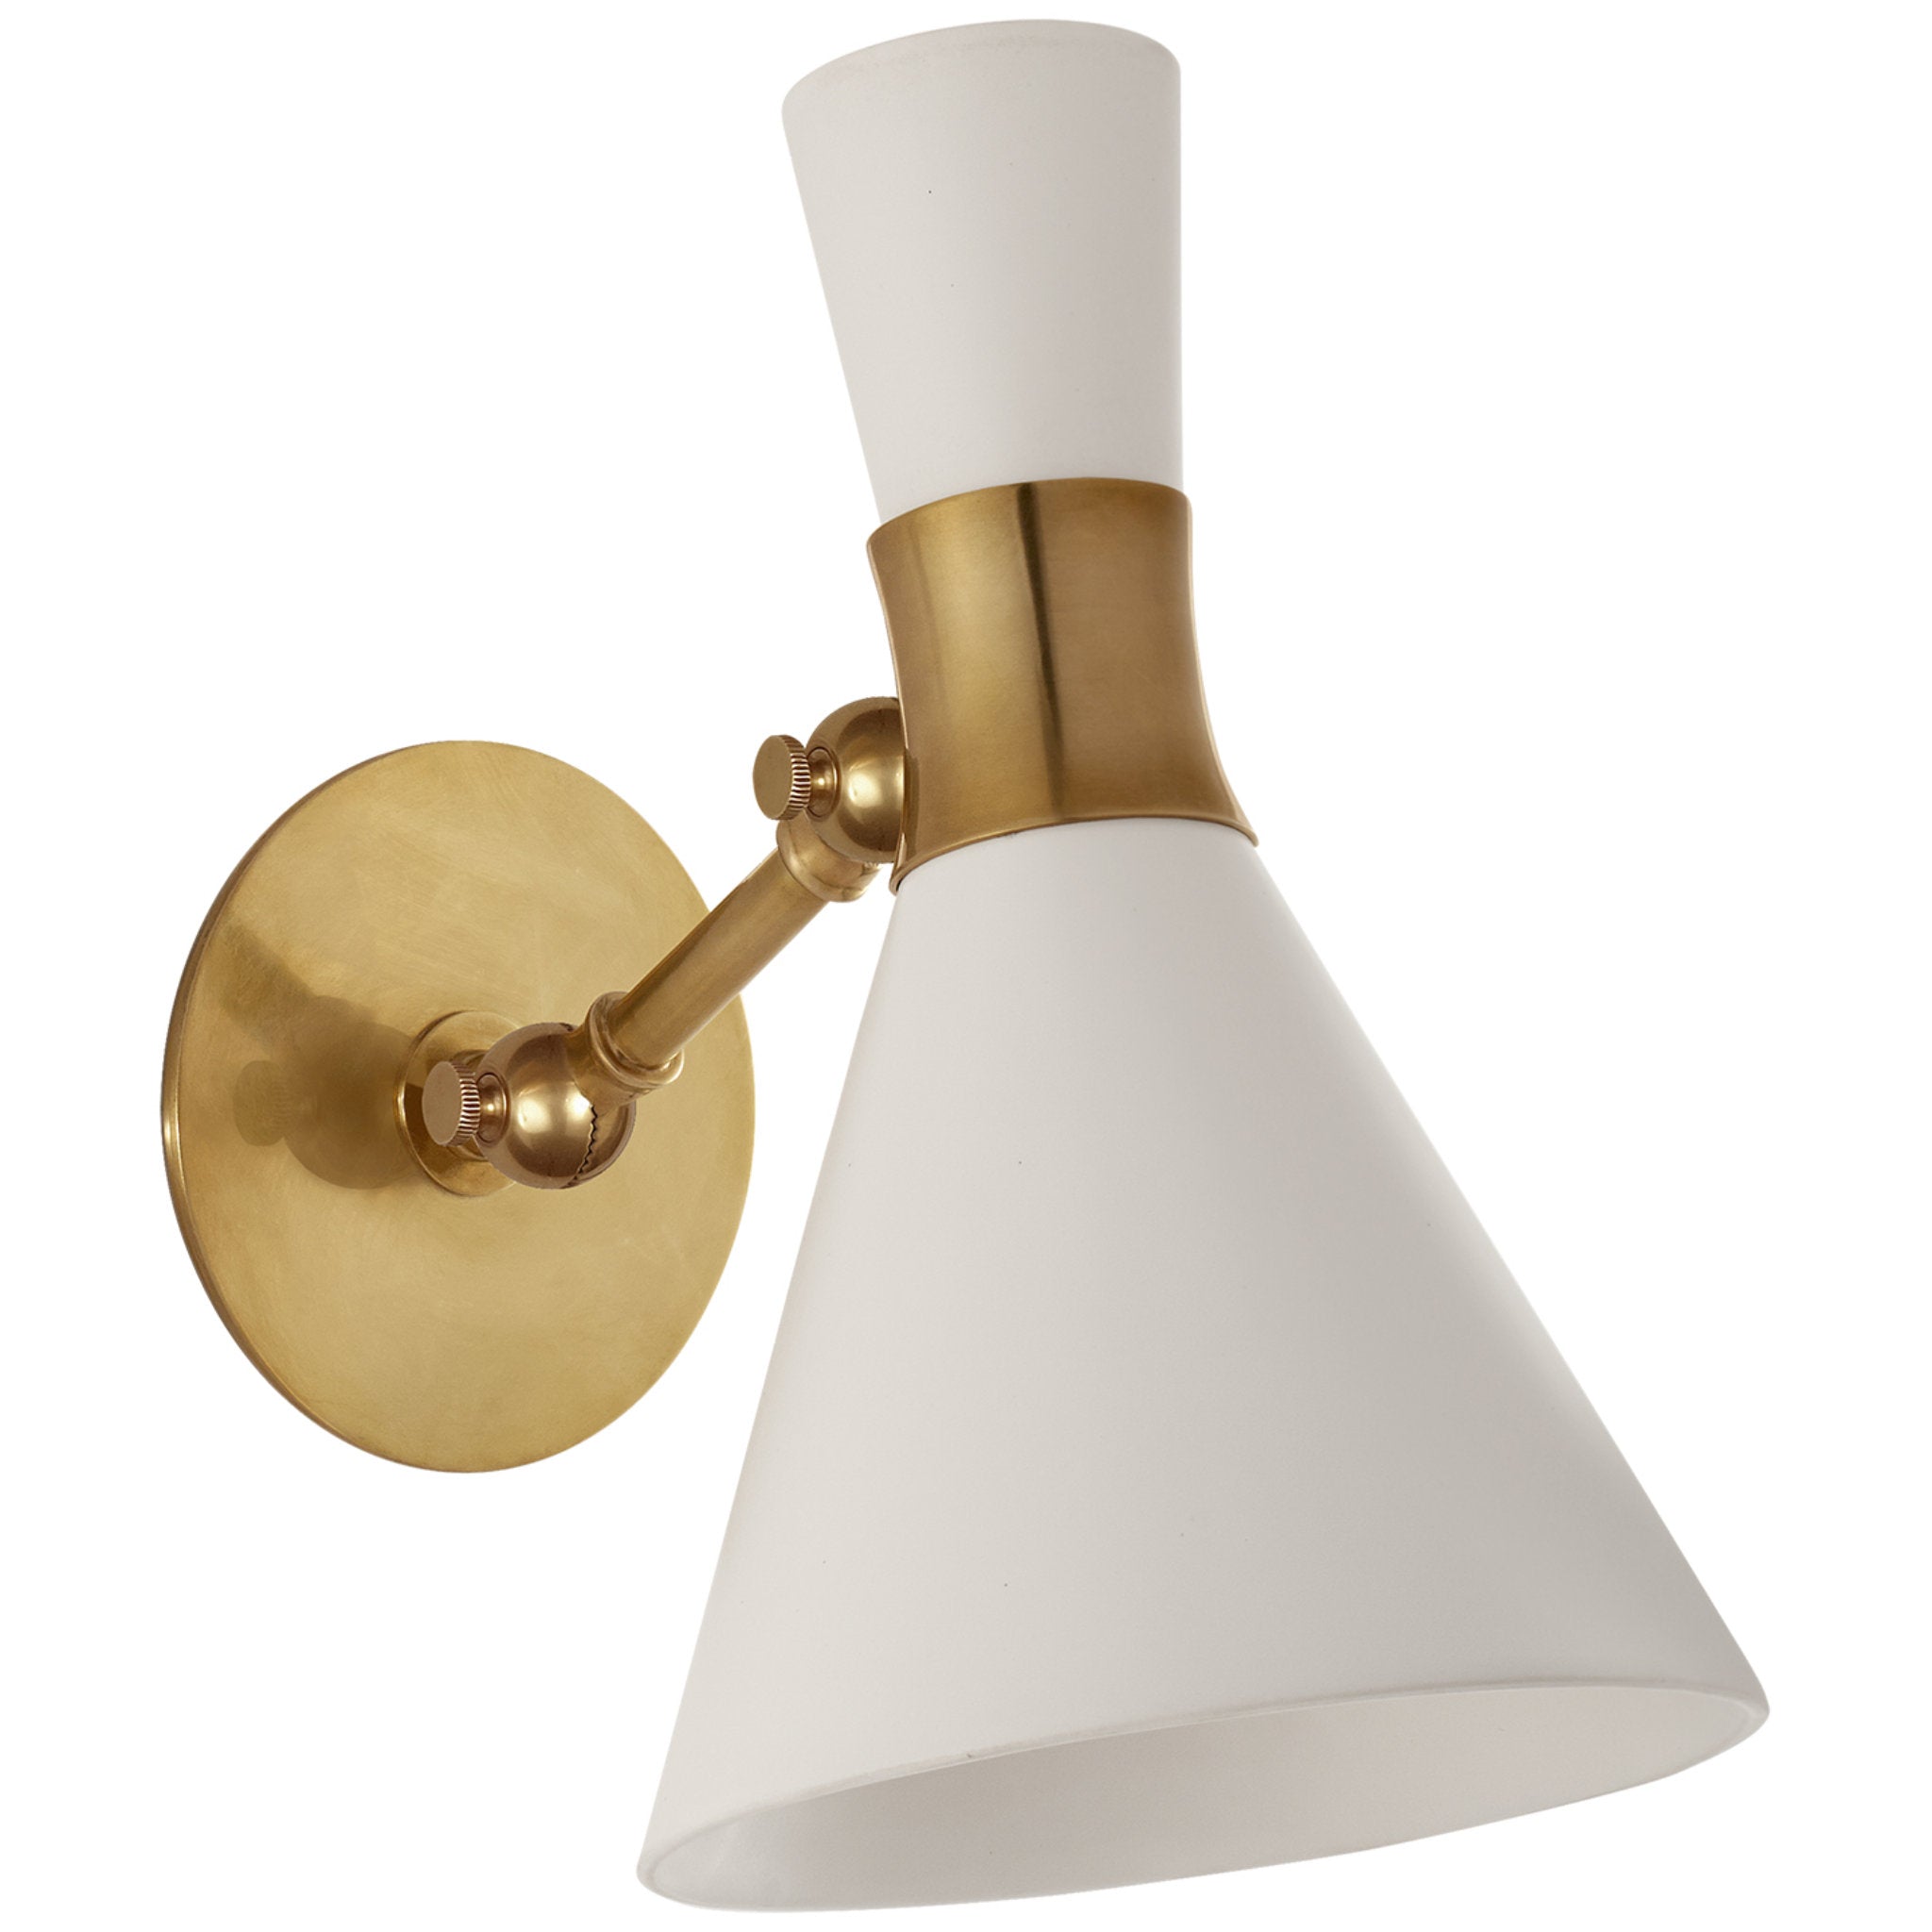 Visual Comfort Liam Small Articulating Sconce in Hand-Rubbed Antique Brass with Matte White Shade